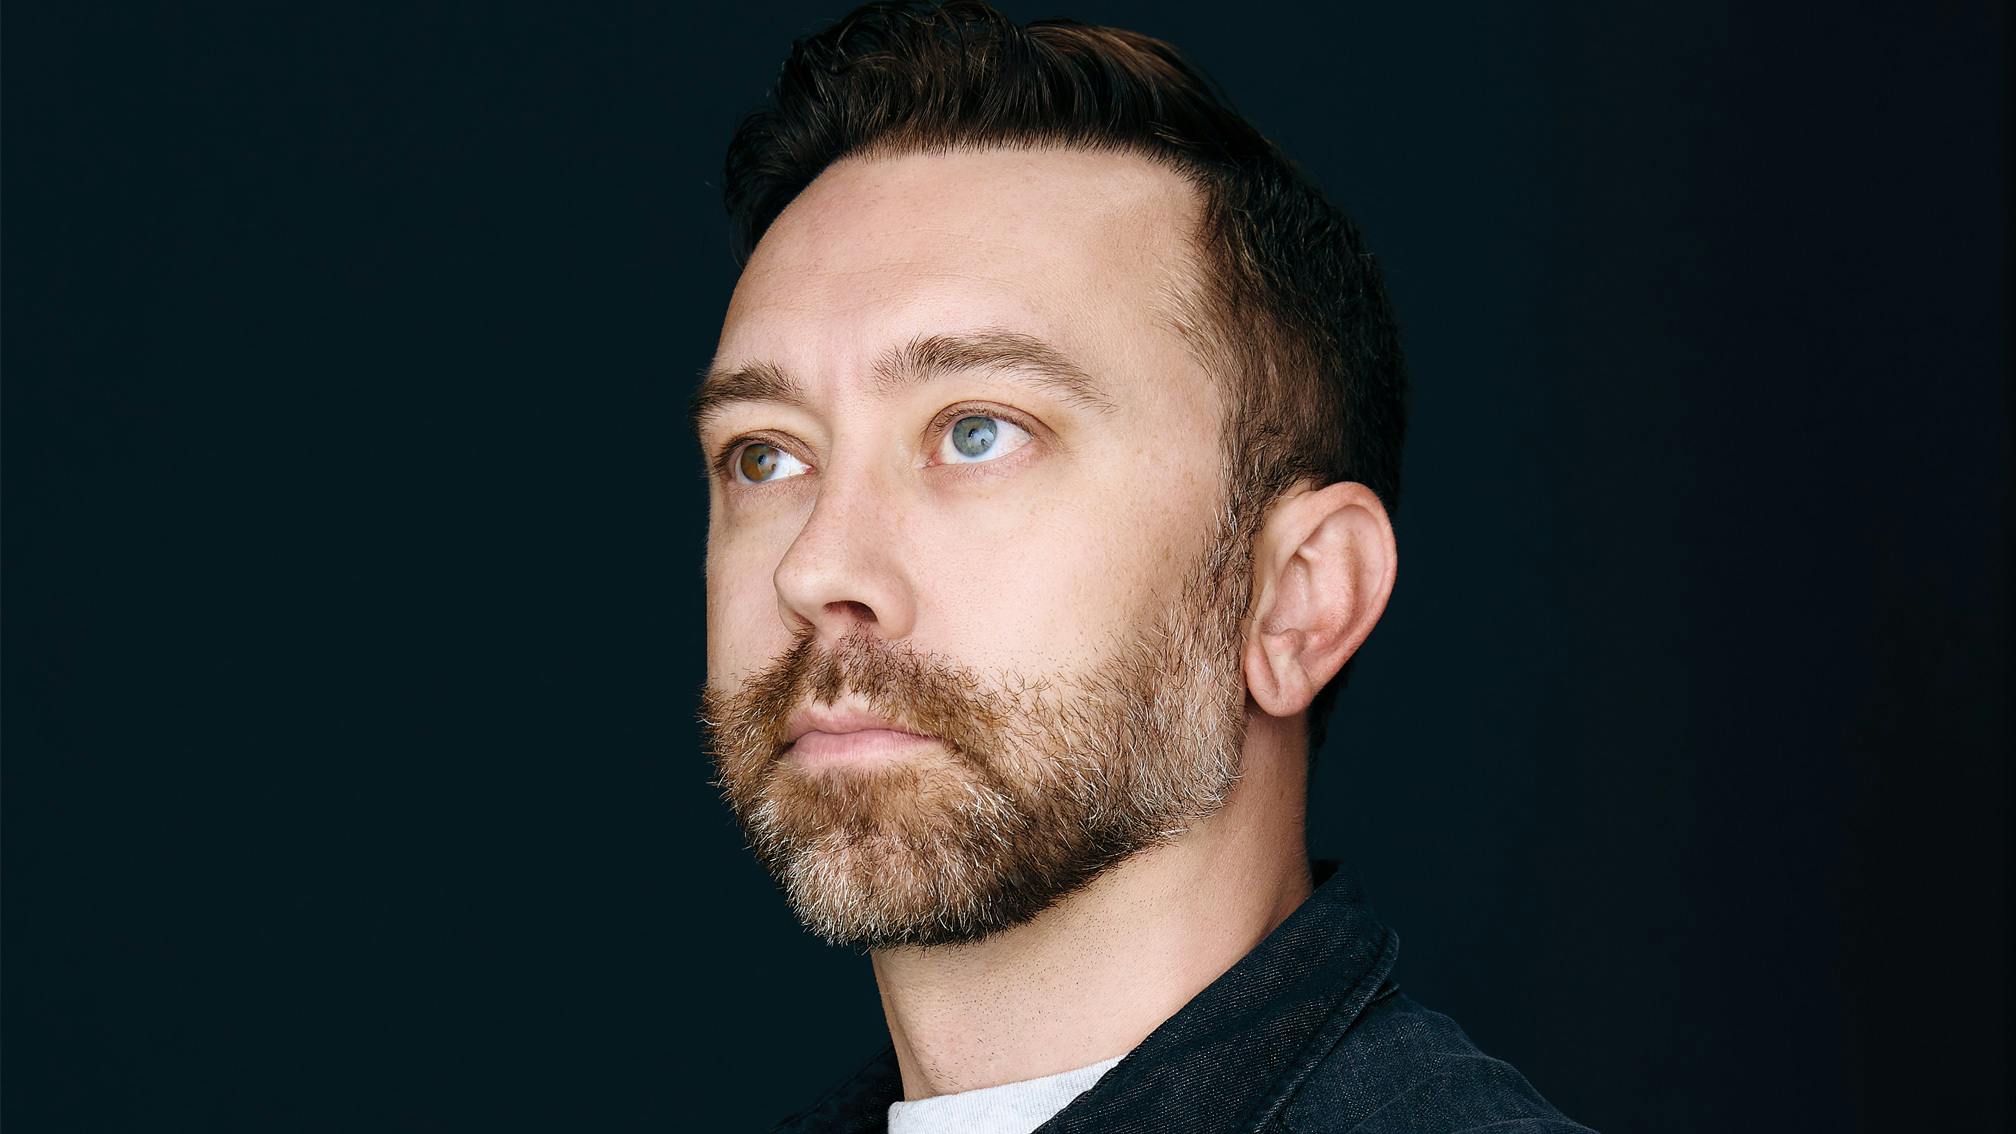 Tim McIlrath: “Rise Against Are Living Proof That There’s A Hungry Audience Who Want Music Laced With Ideas Of Change”